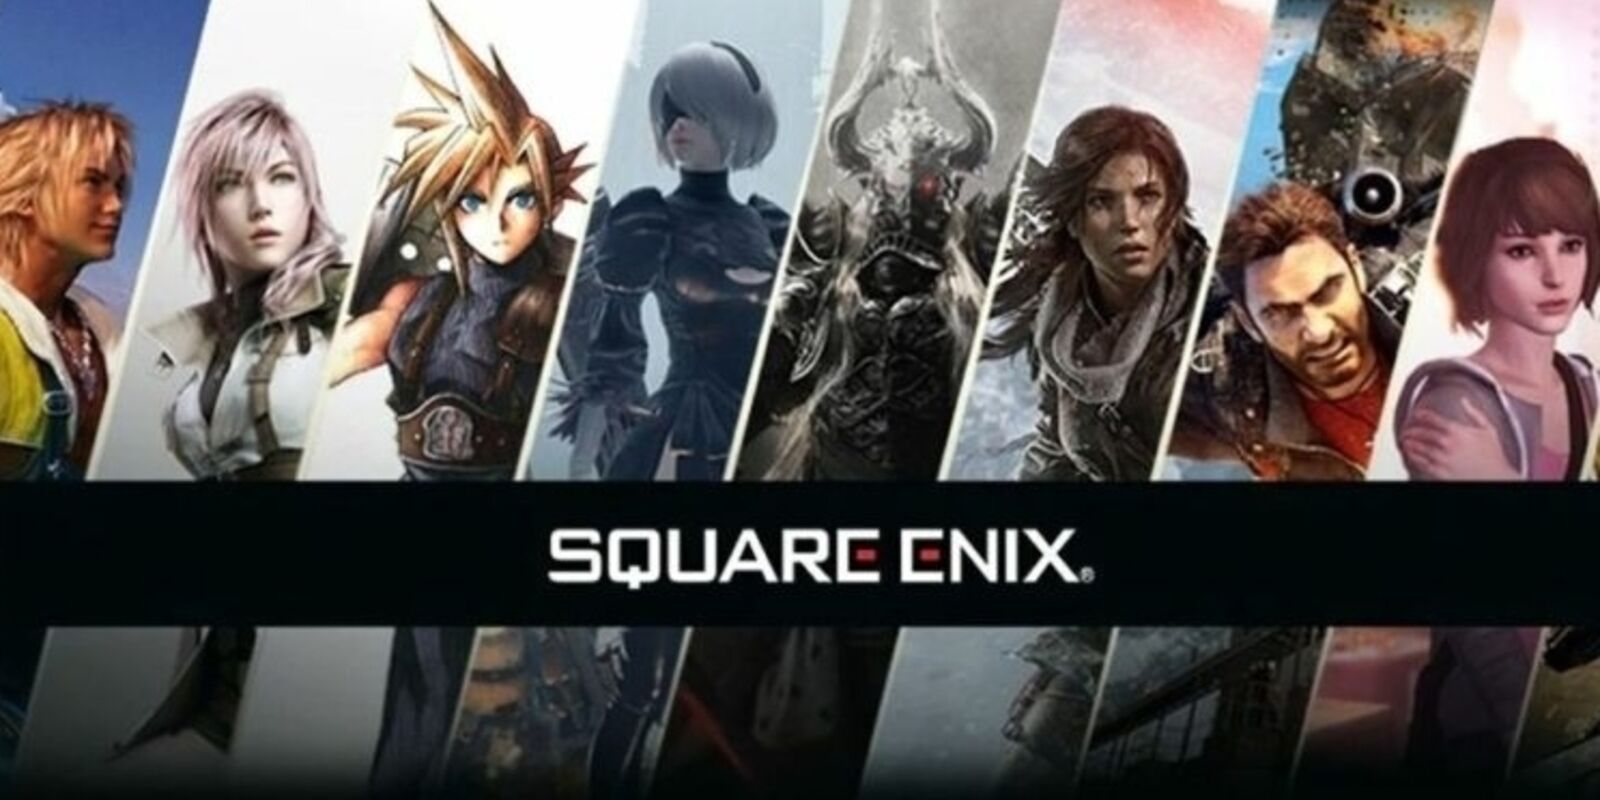 To get stronger in the fight against Xbox, Sony may buy Square Enix